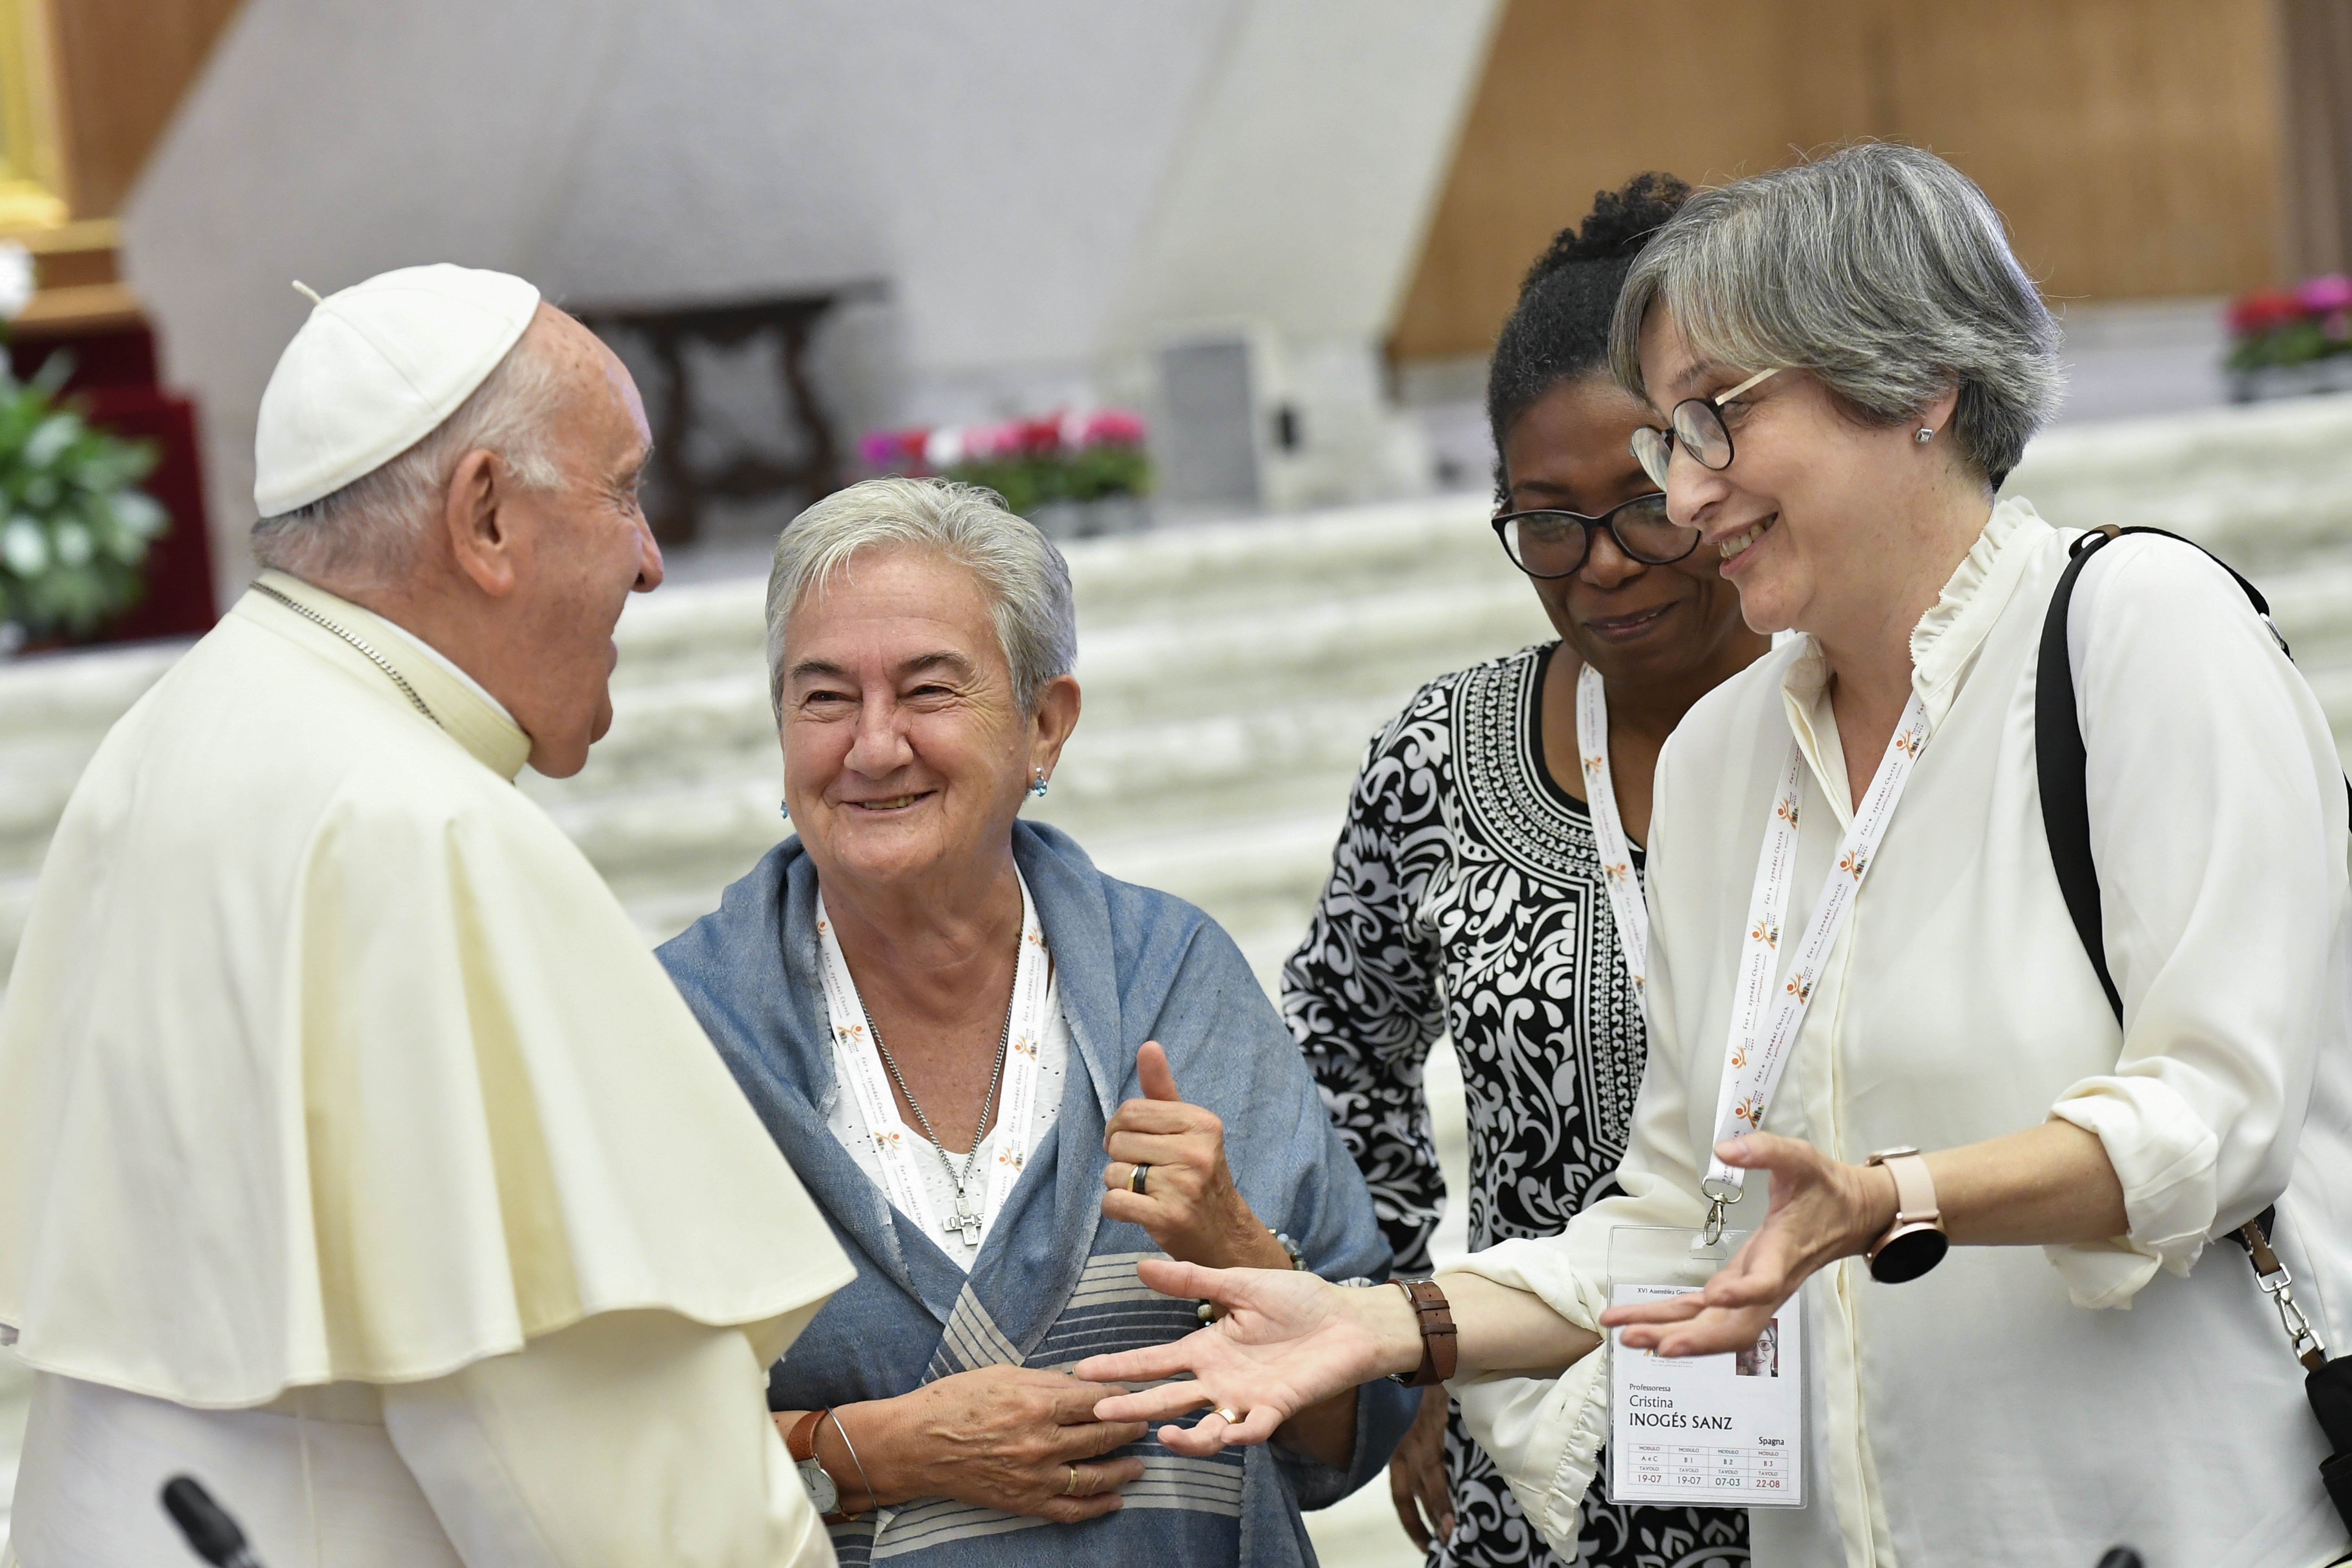 Pope Francis with women at synod